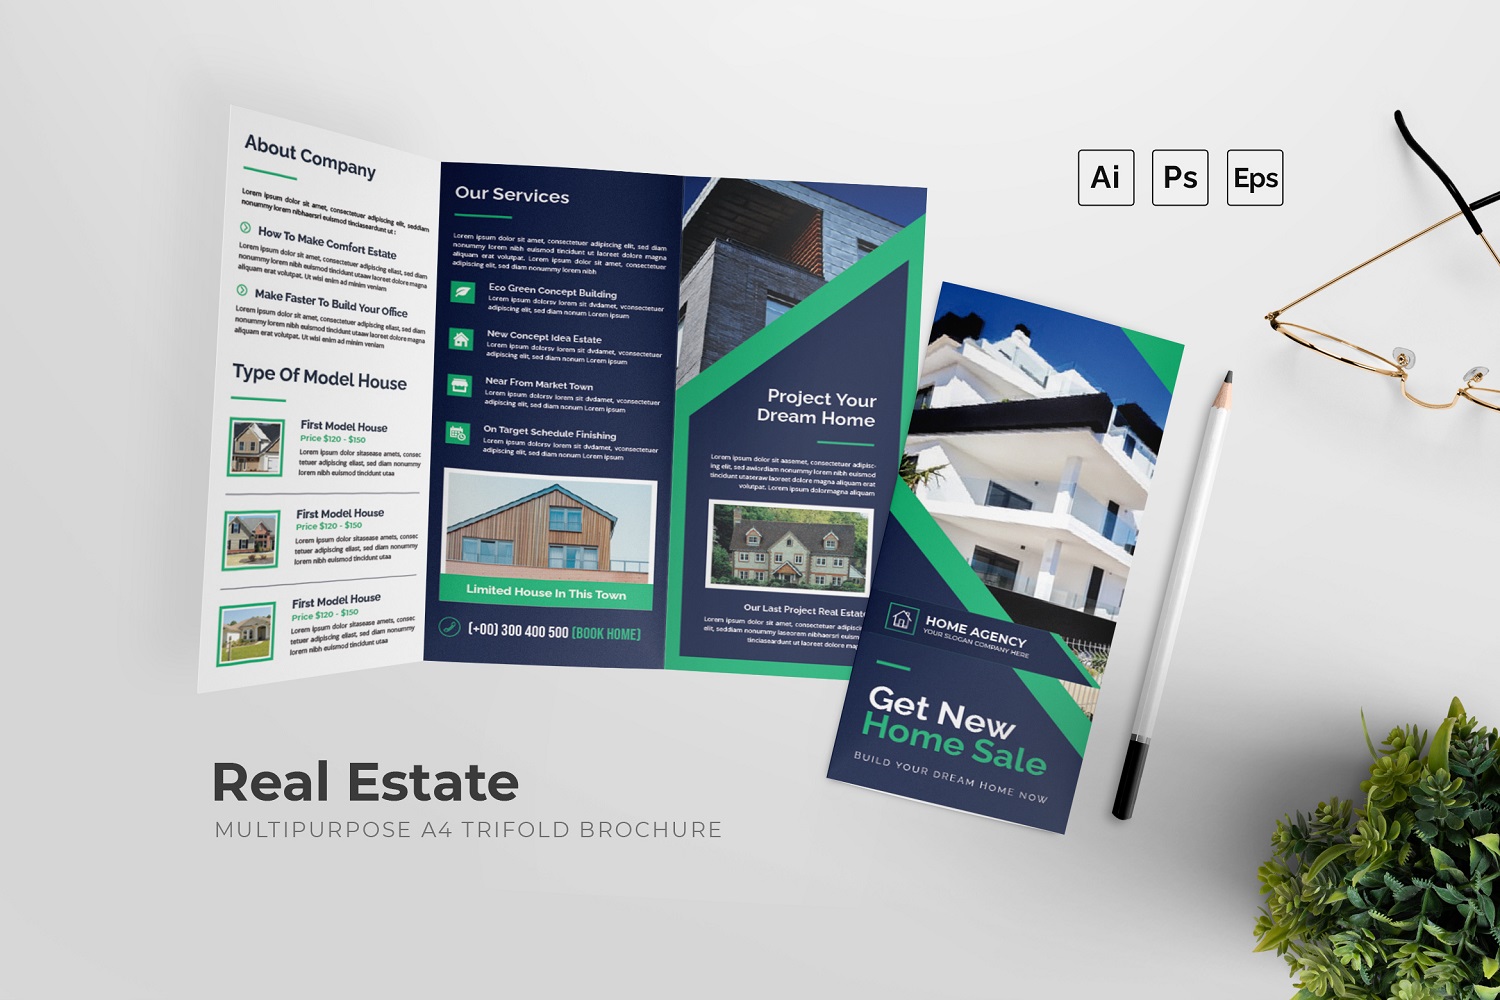 Real Estate Trifold Flyer